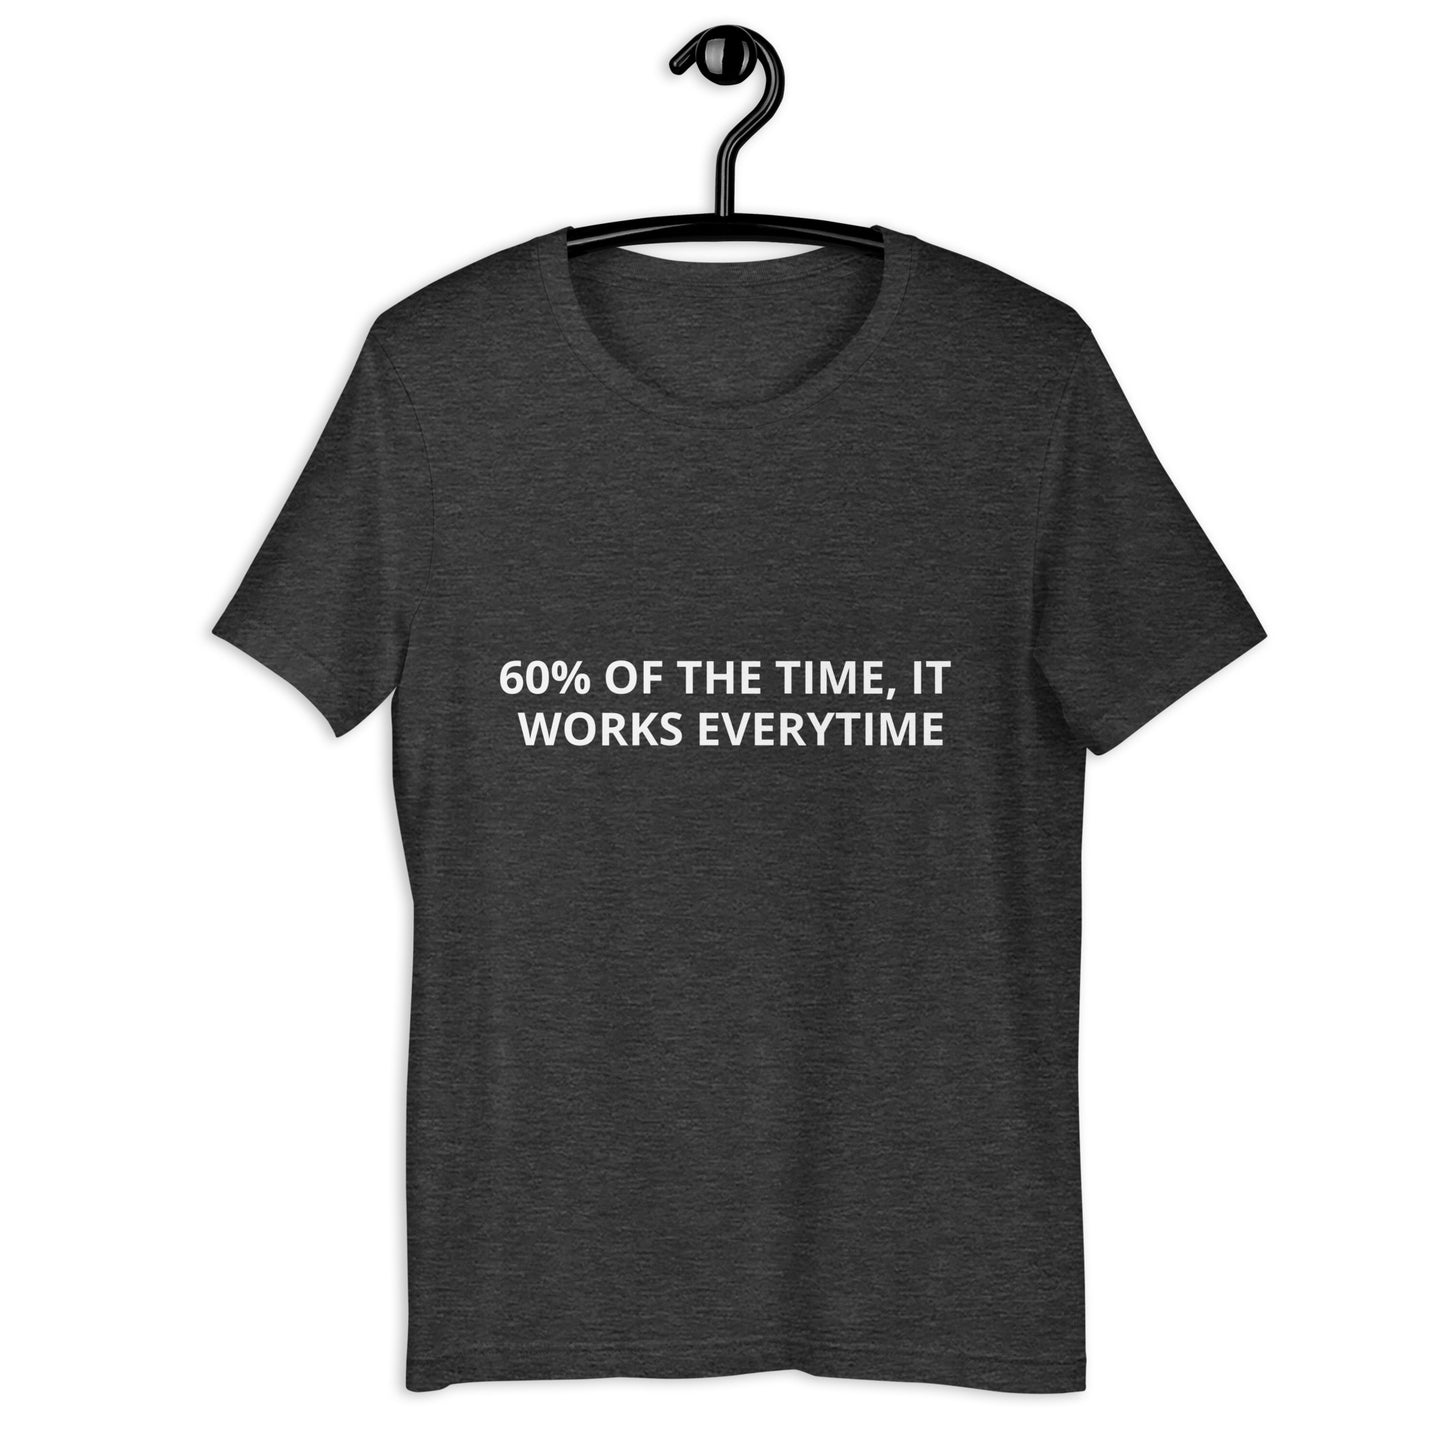 60% OF THE TIME, IT WORKS EVERYTIME  Unisex t-shirt